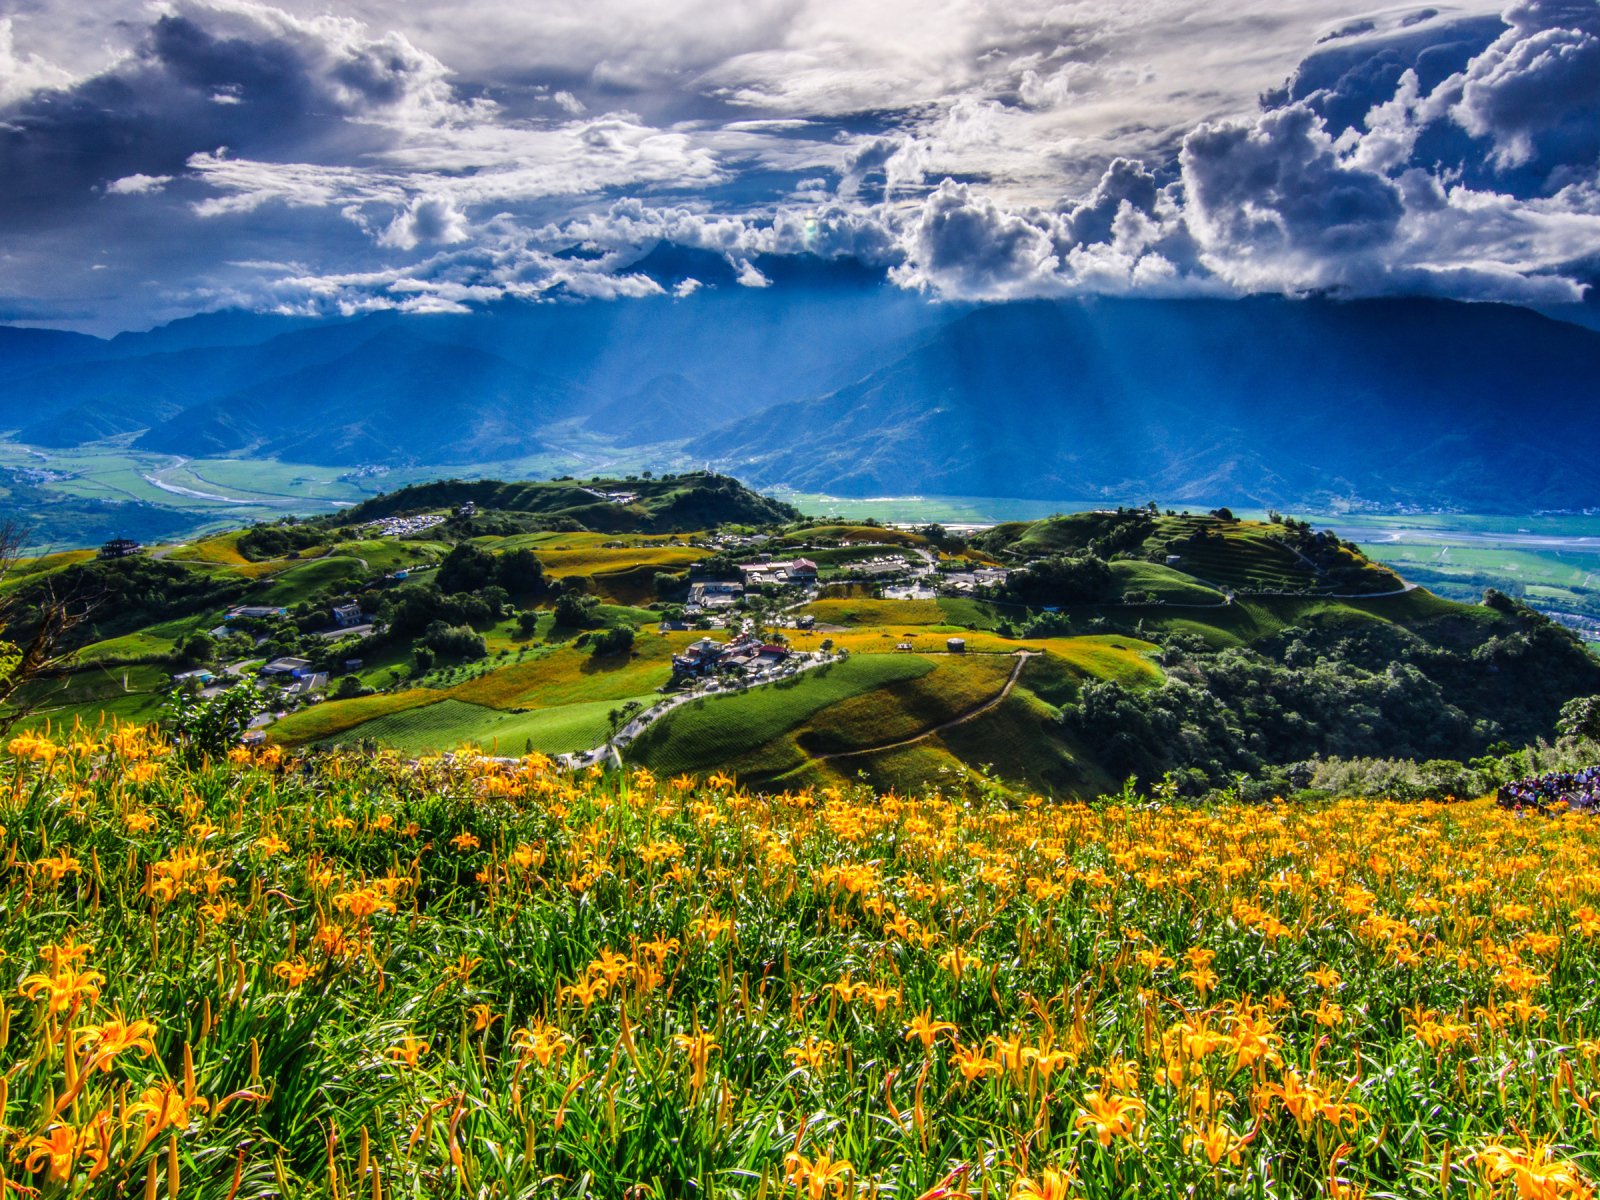 The rays of the sun make their way through white clouds over blooming hills. Taiwan.